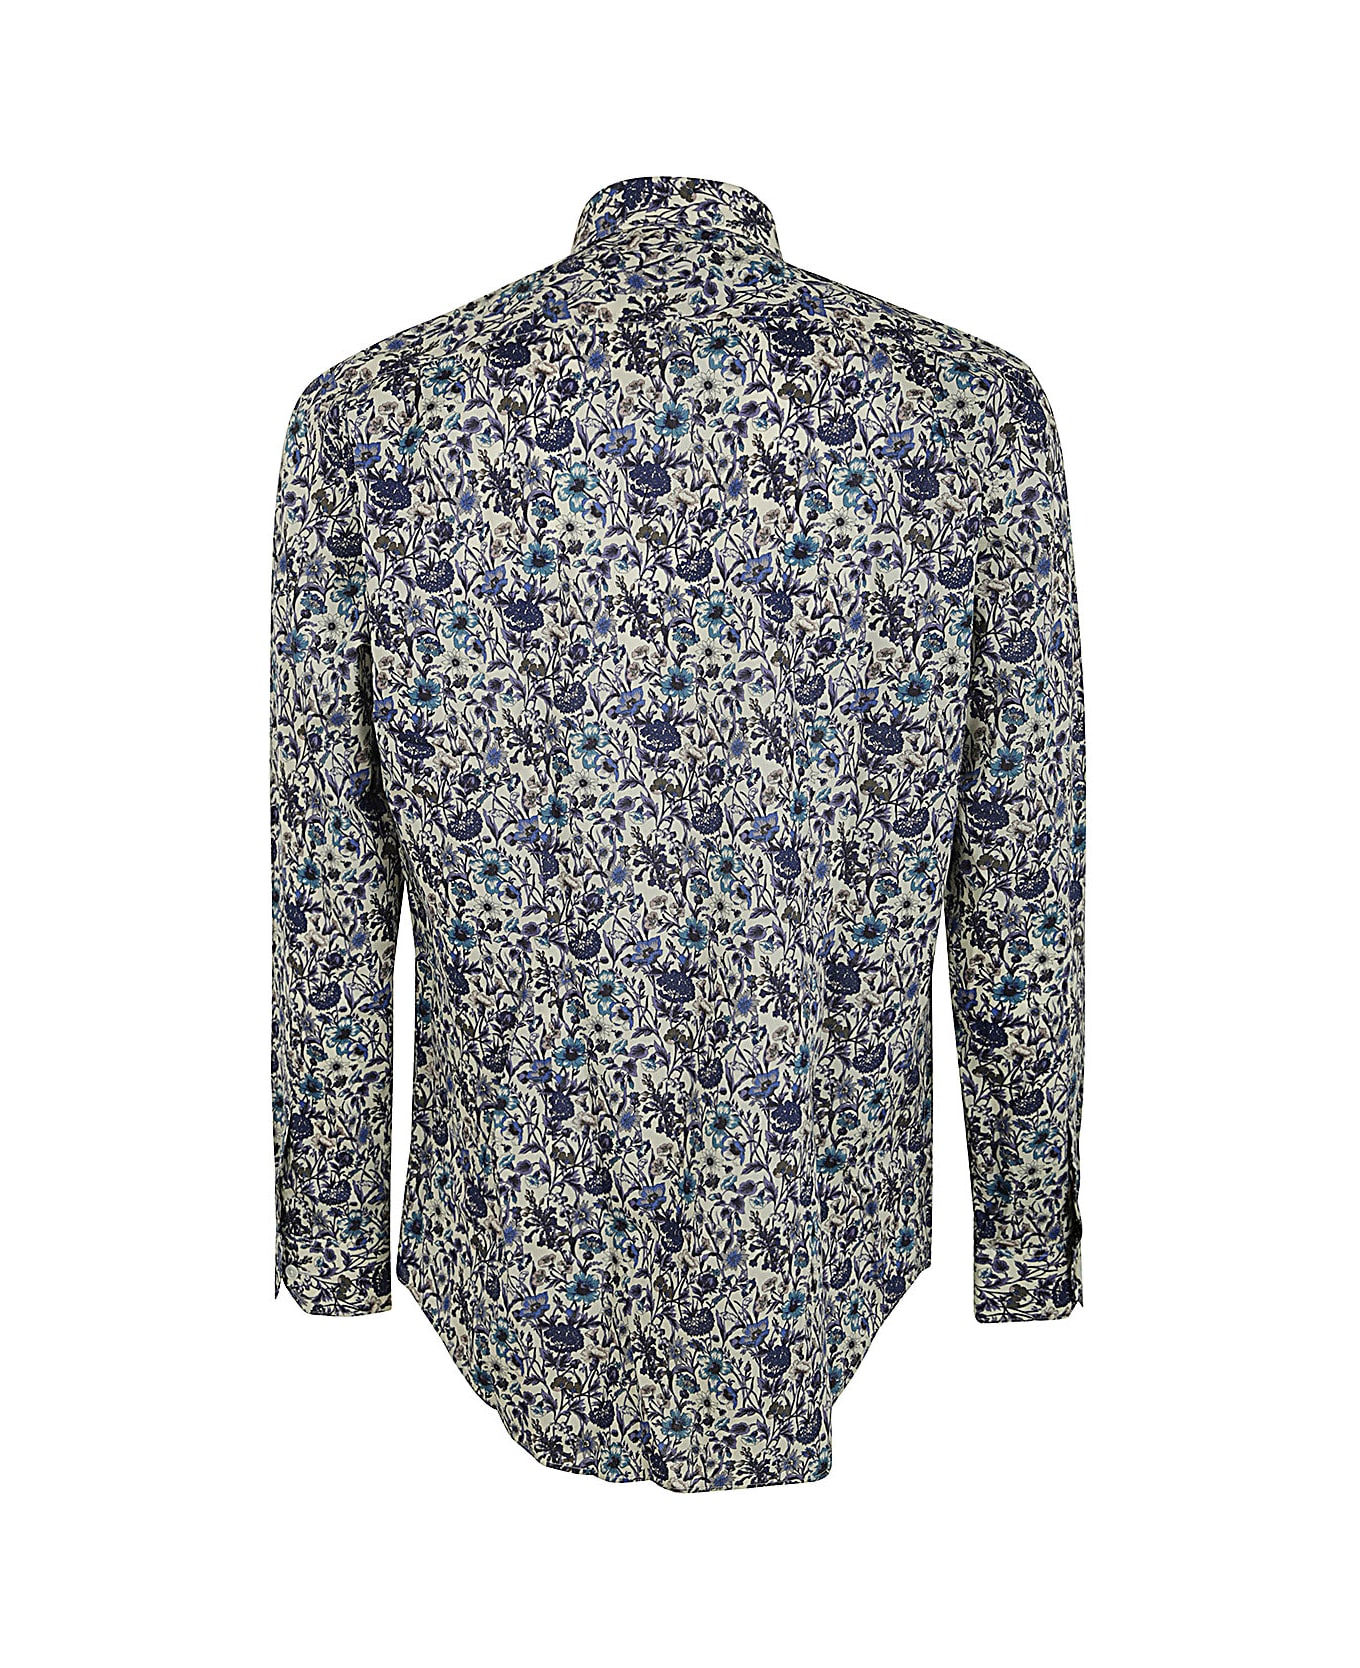 Paul Smith Mens Tailored Fit Shirt - Blues シャツ